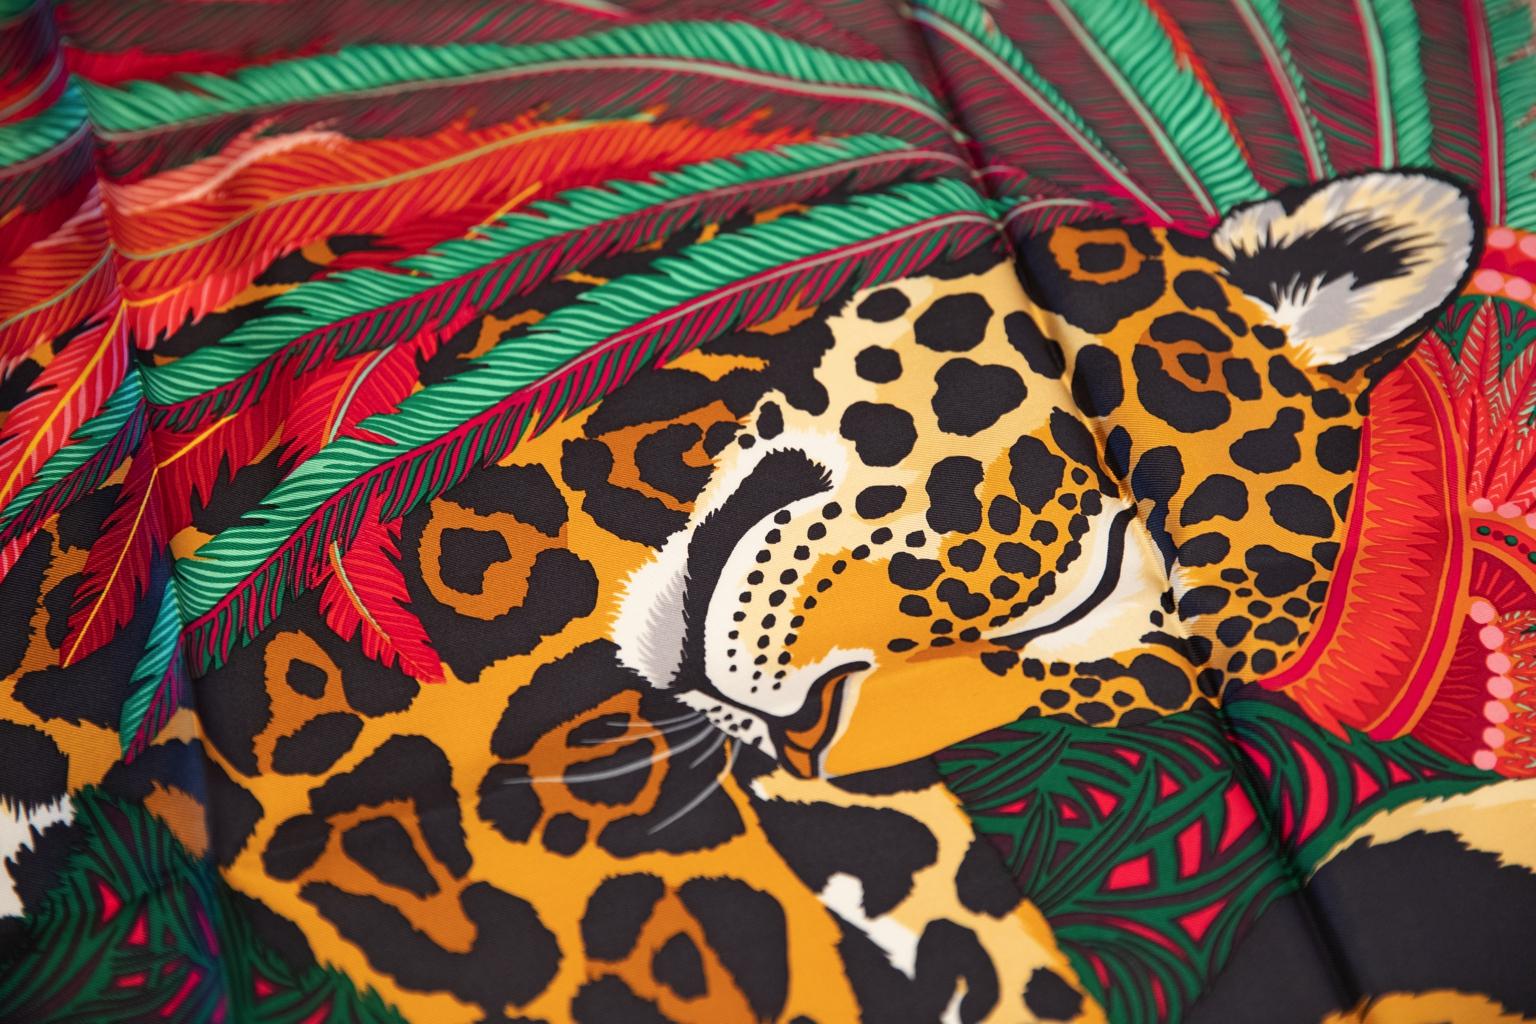 Hermès red silk Jaguar Quetzal scarf designed by Alice Shirley. Hand-rolled edges. New in box.